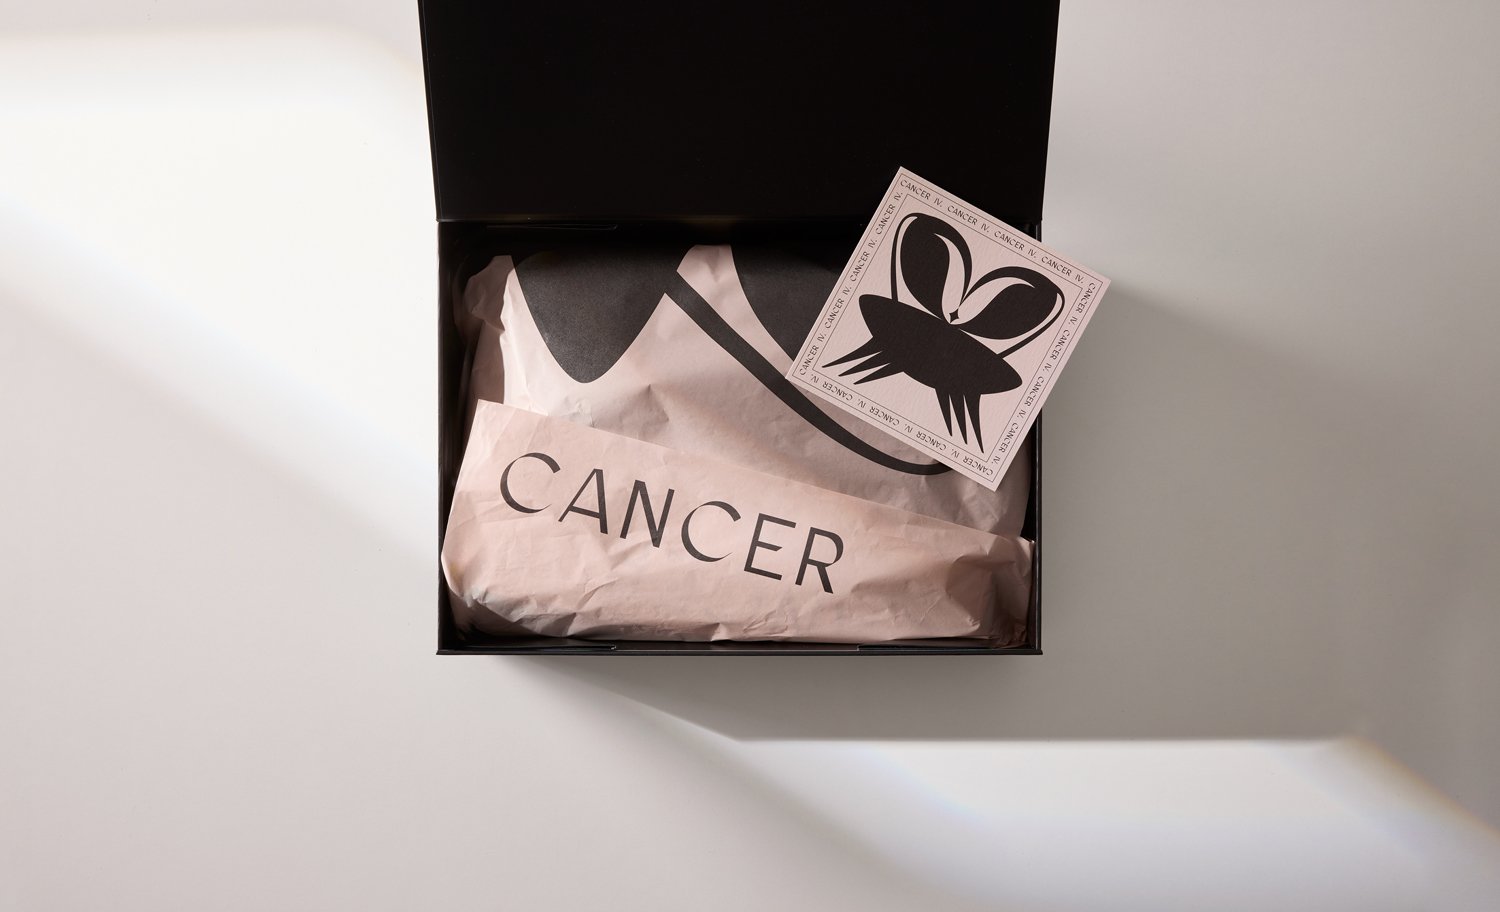 New brand identity and packaging design by Auckland-based Seachange for Australian contemporary gift box business TWELV